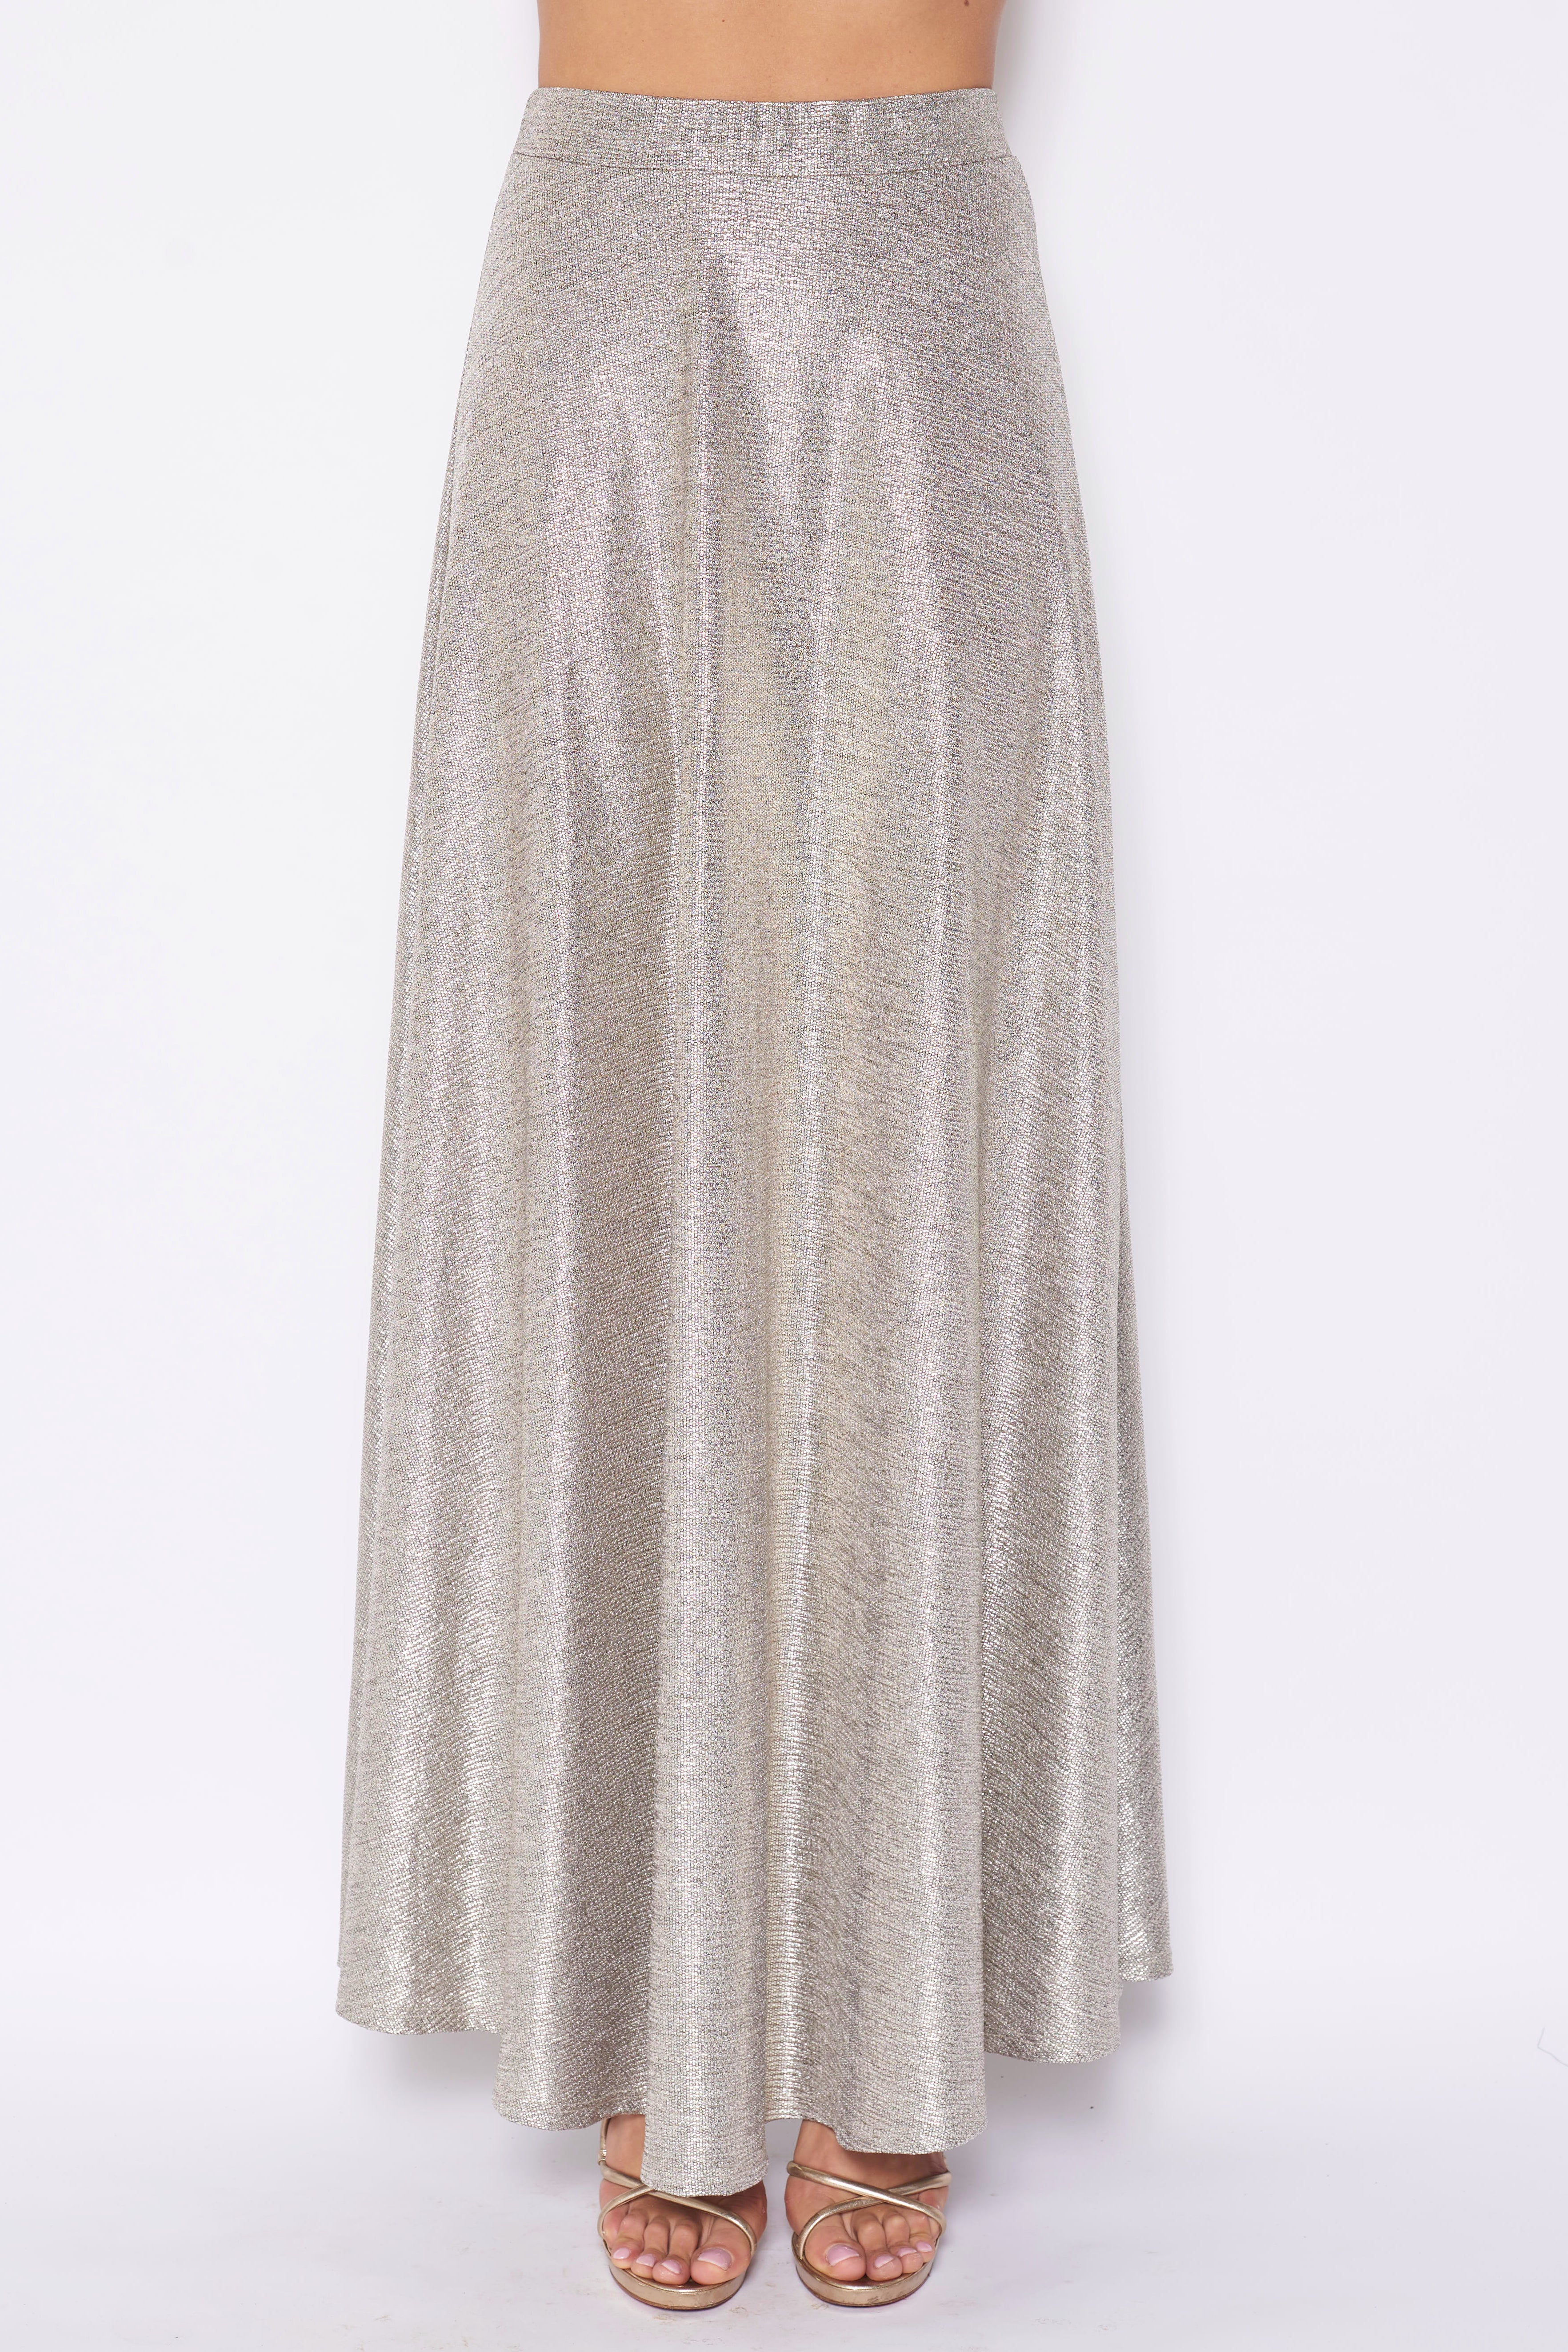 TOSCA - long skirt in charcoal grey lurex